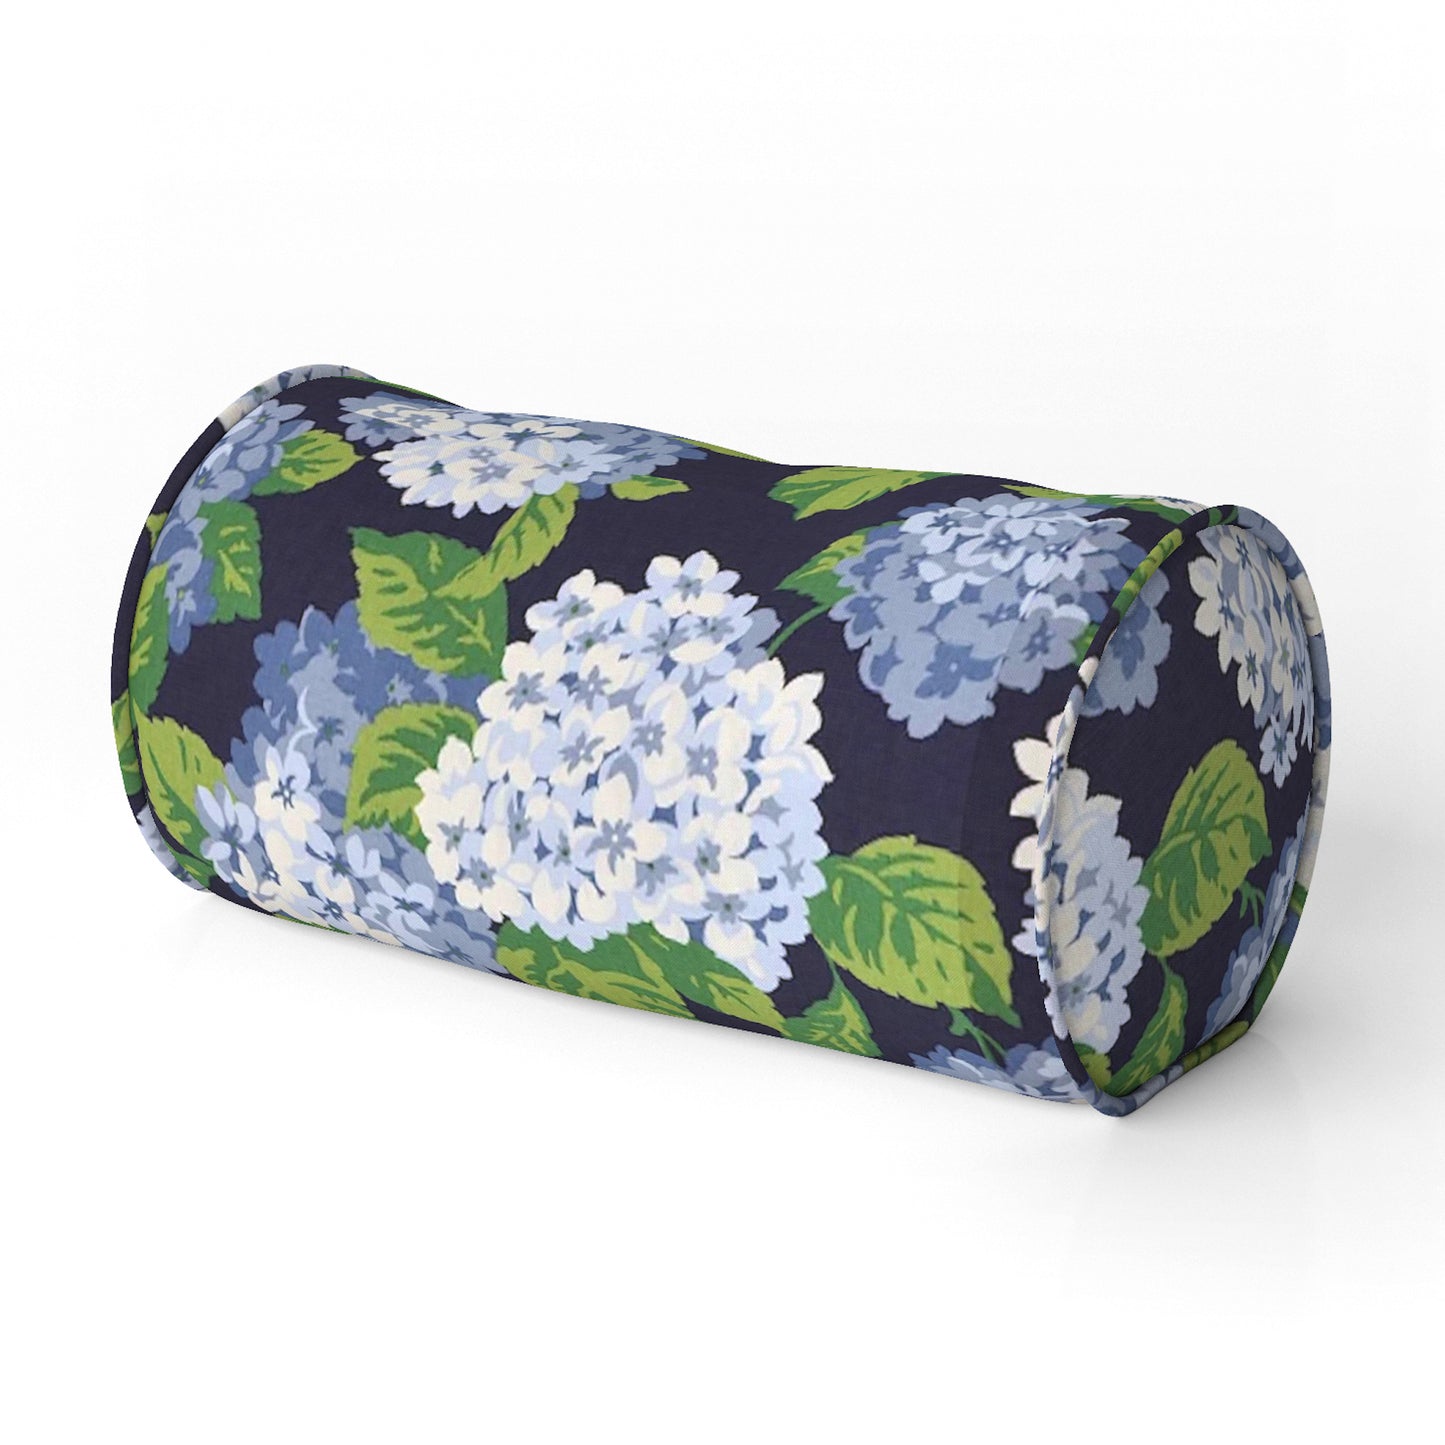 Decorative Pillows in Summerwind Navy Blue Hydrangea Floral, Large Scale